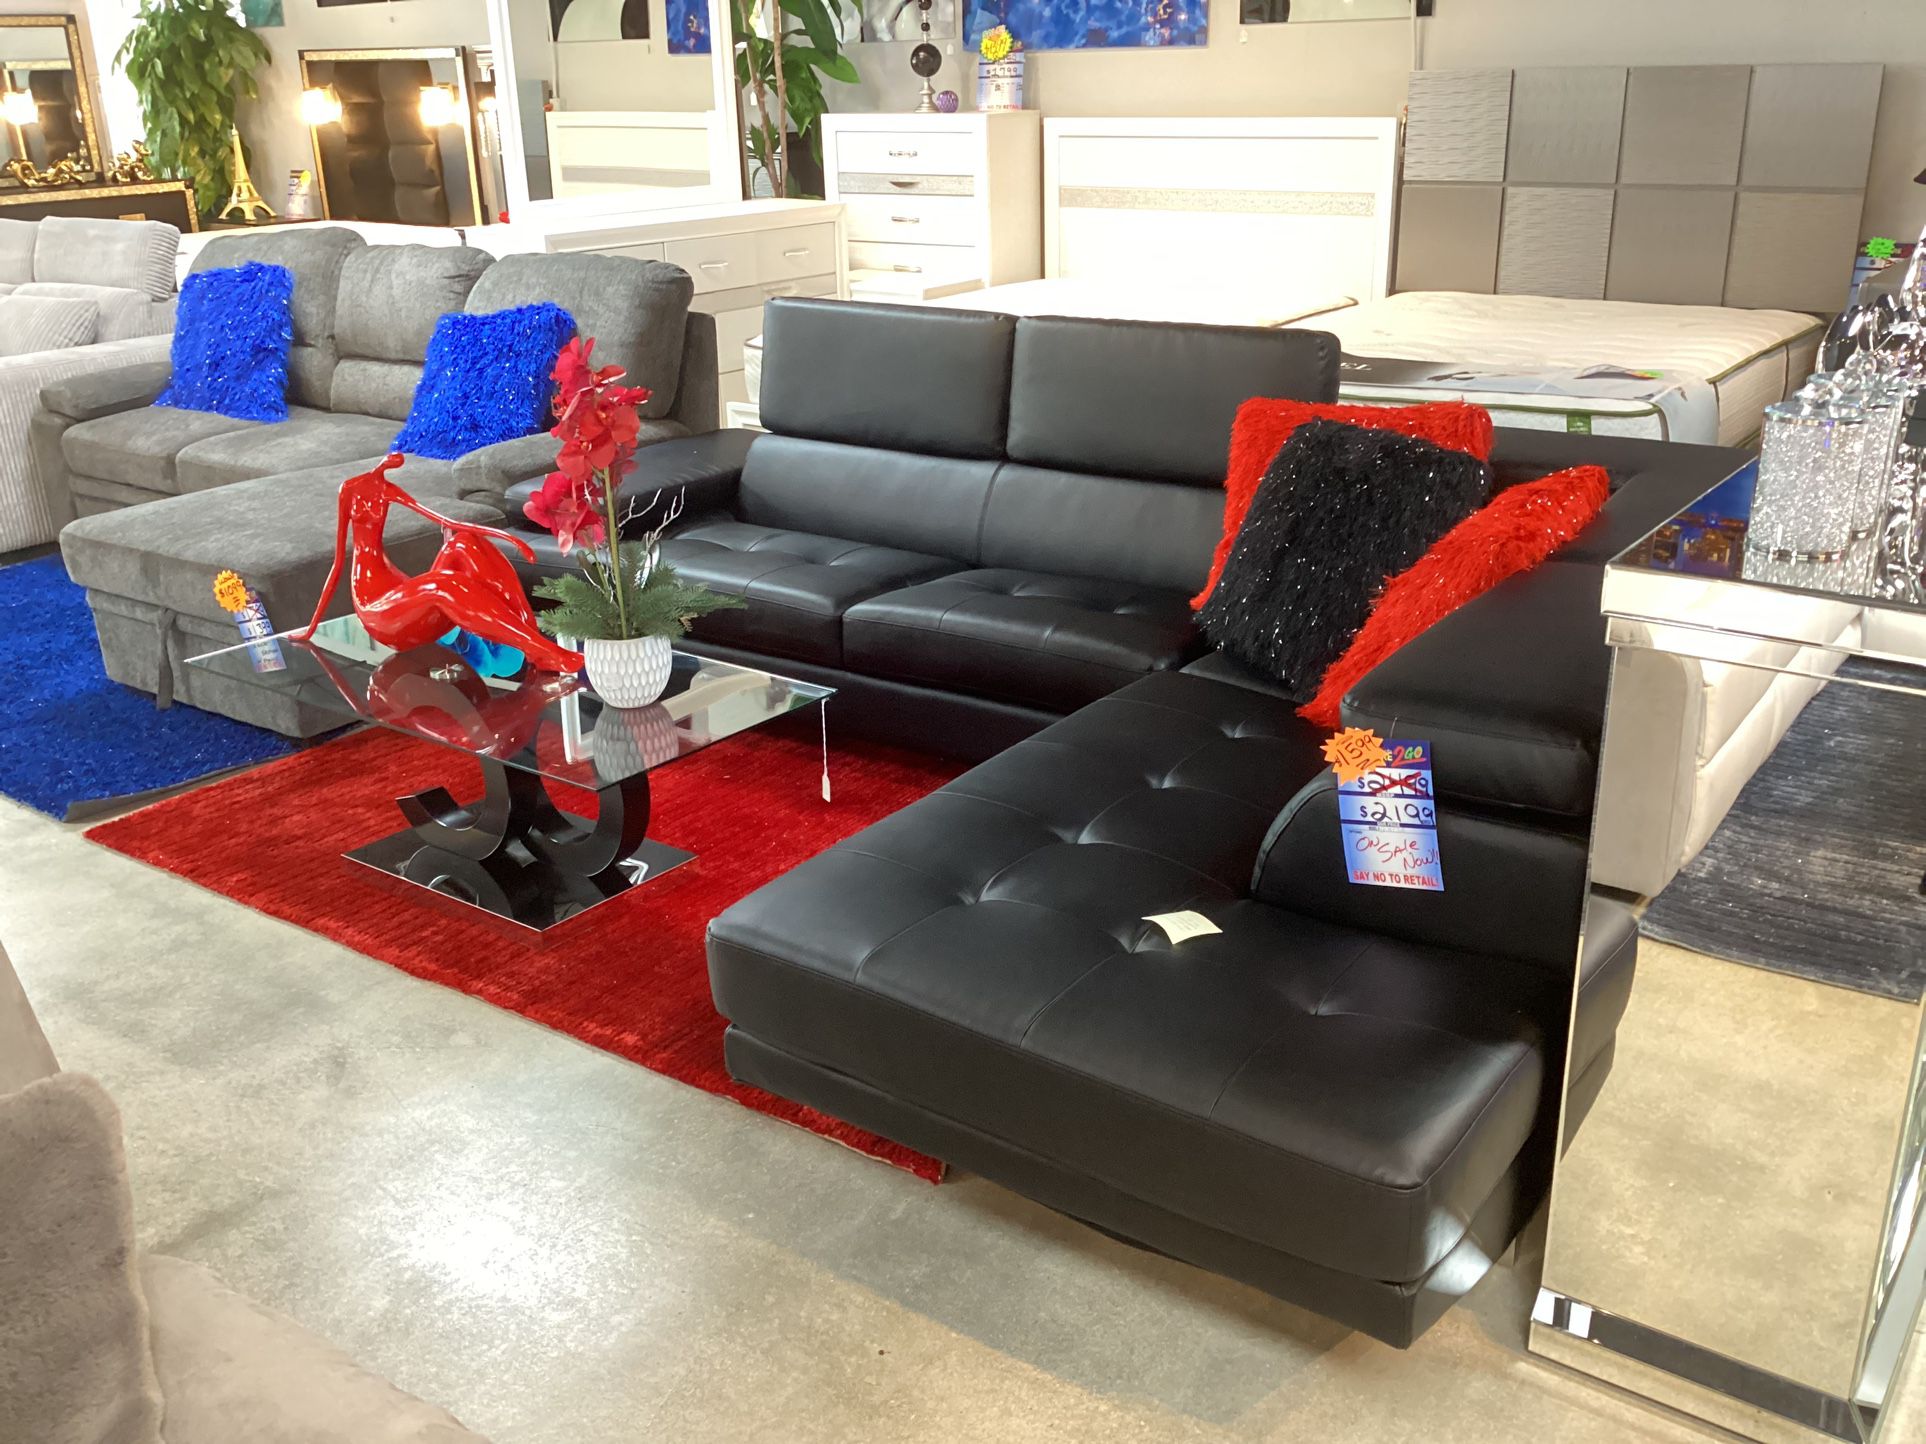  Beautiful Furniture Sofa Sectional L On Sale Now For $1199 Color Black Floor Model 